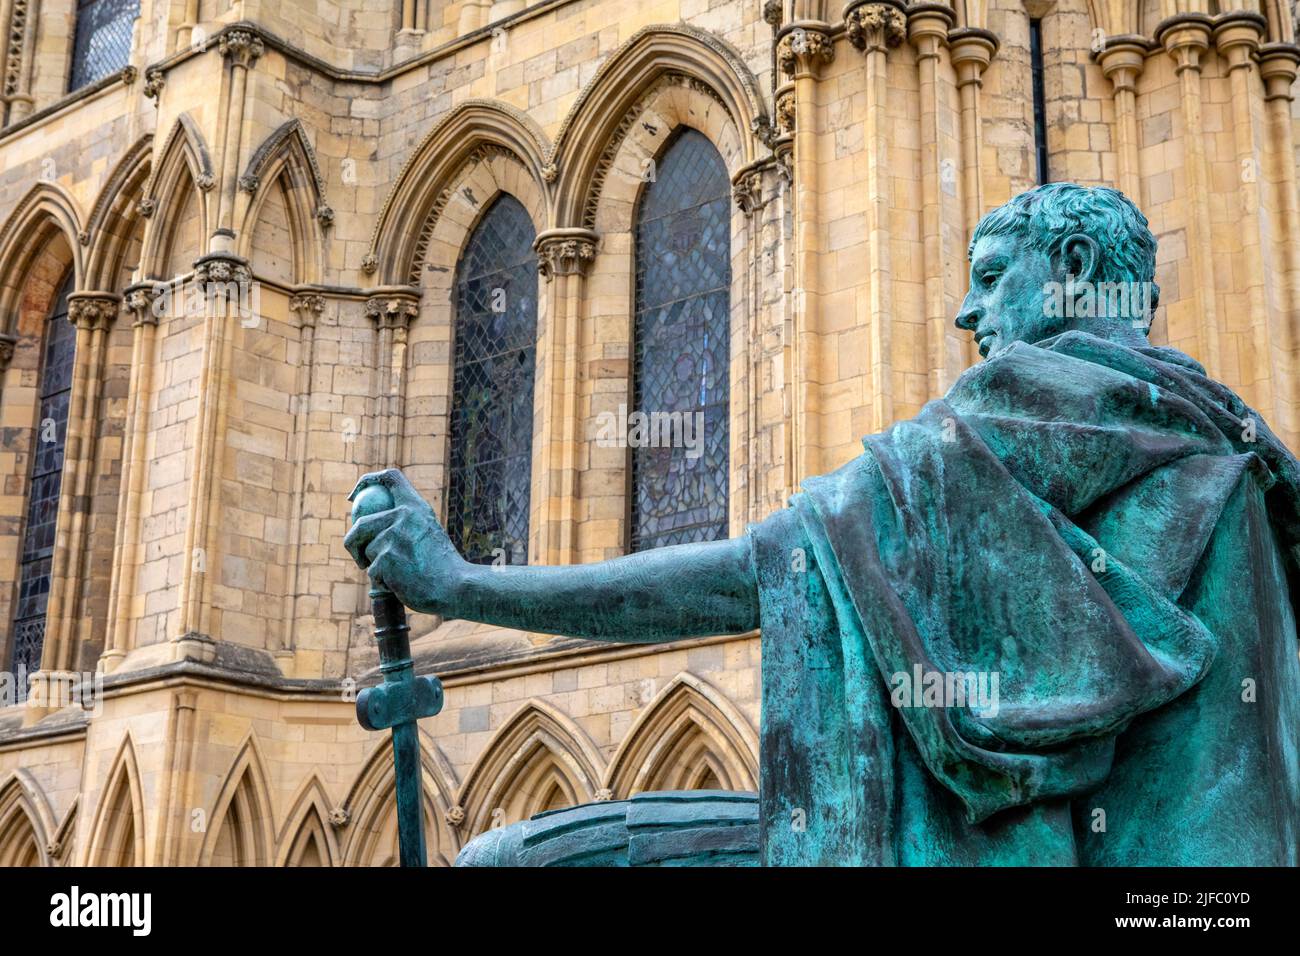 The statue of Roman Emperor Constantine the Great, with the exterior of York Minster pictured behind, in the beautiful city of York, UK. Stock Photo